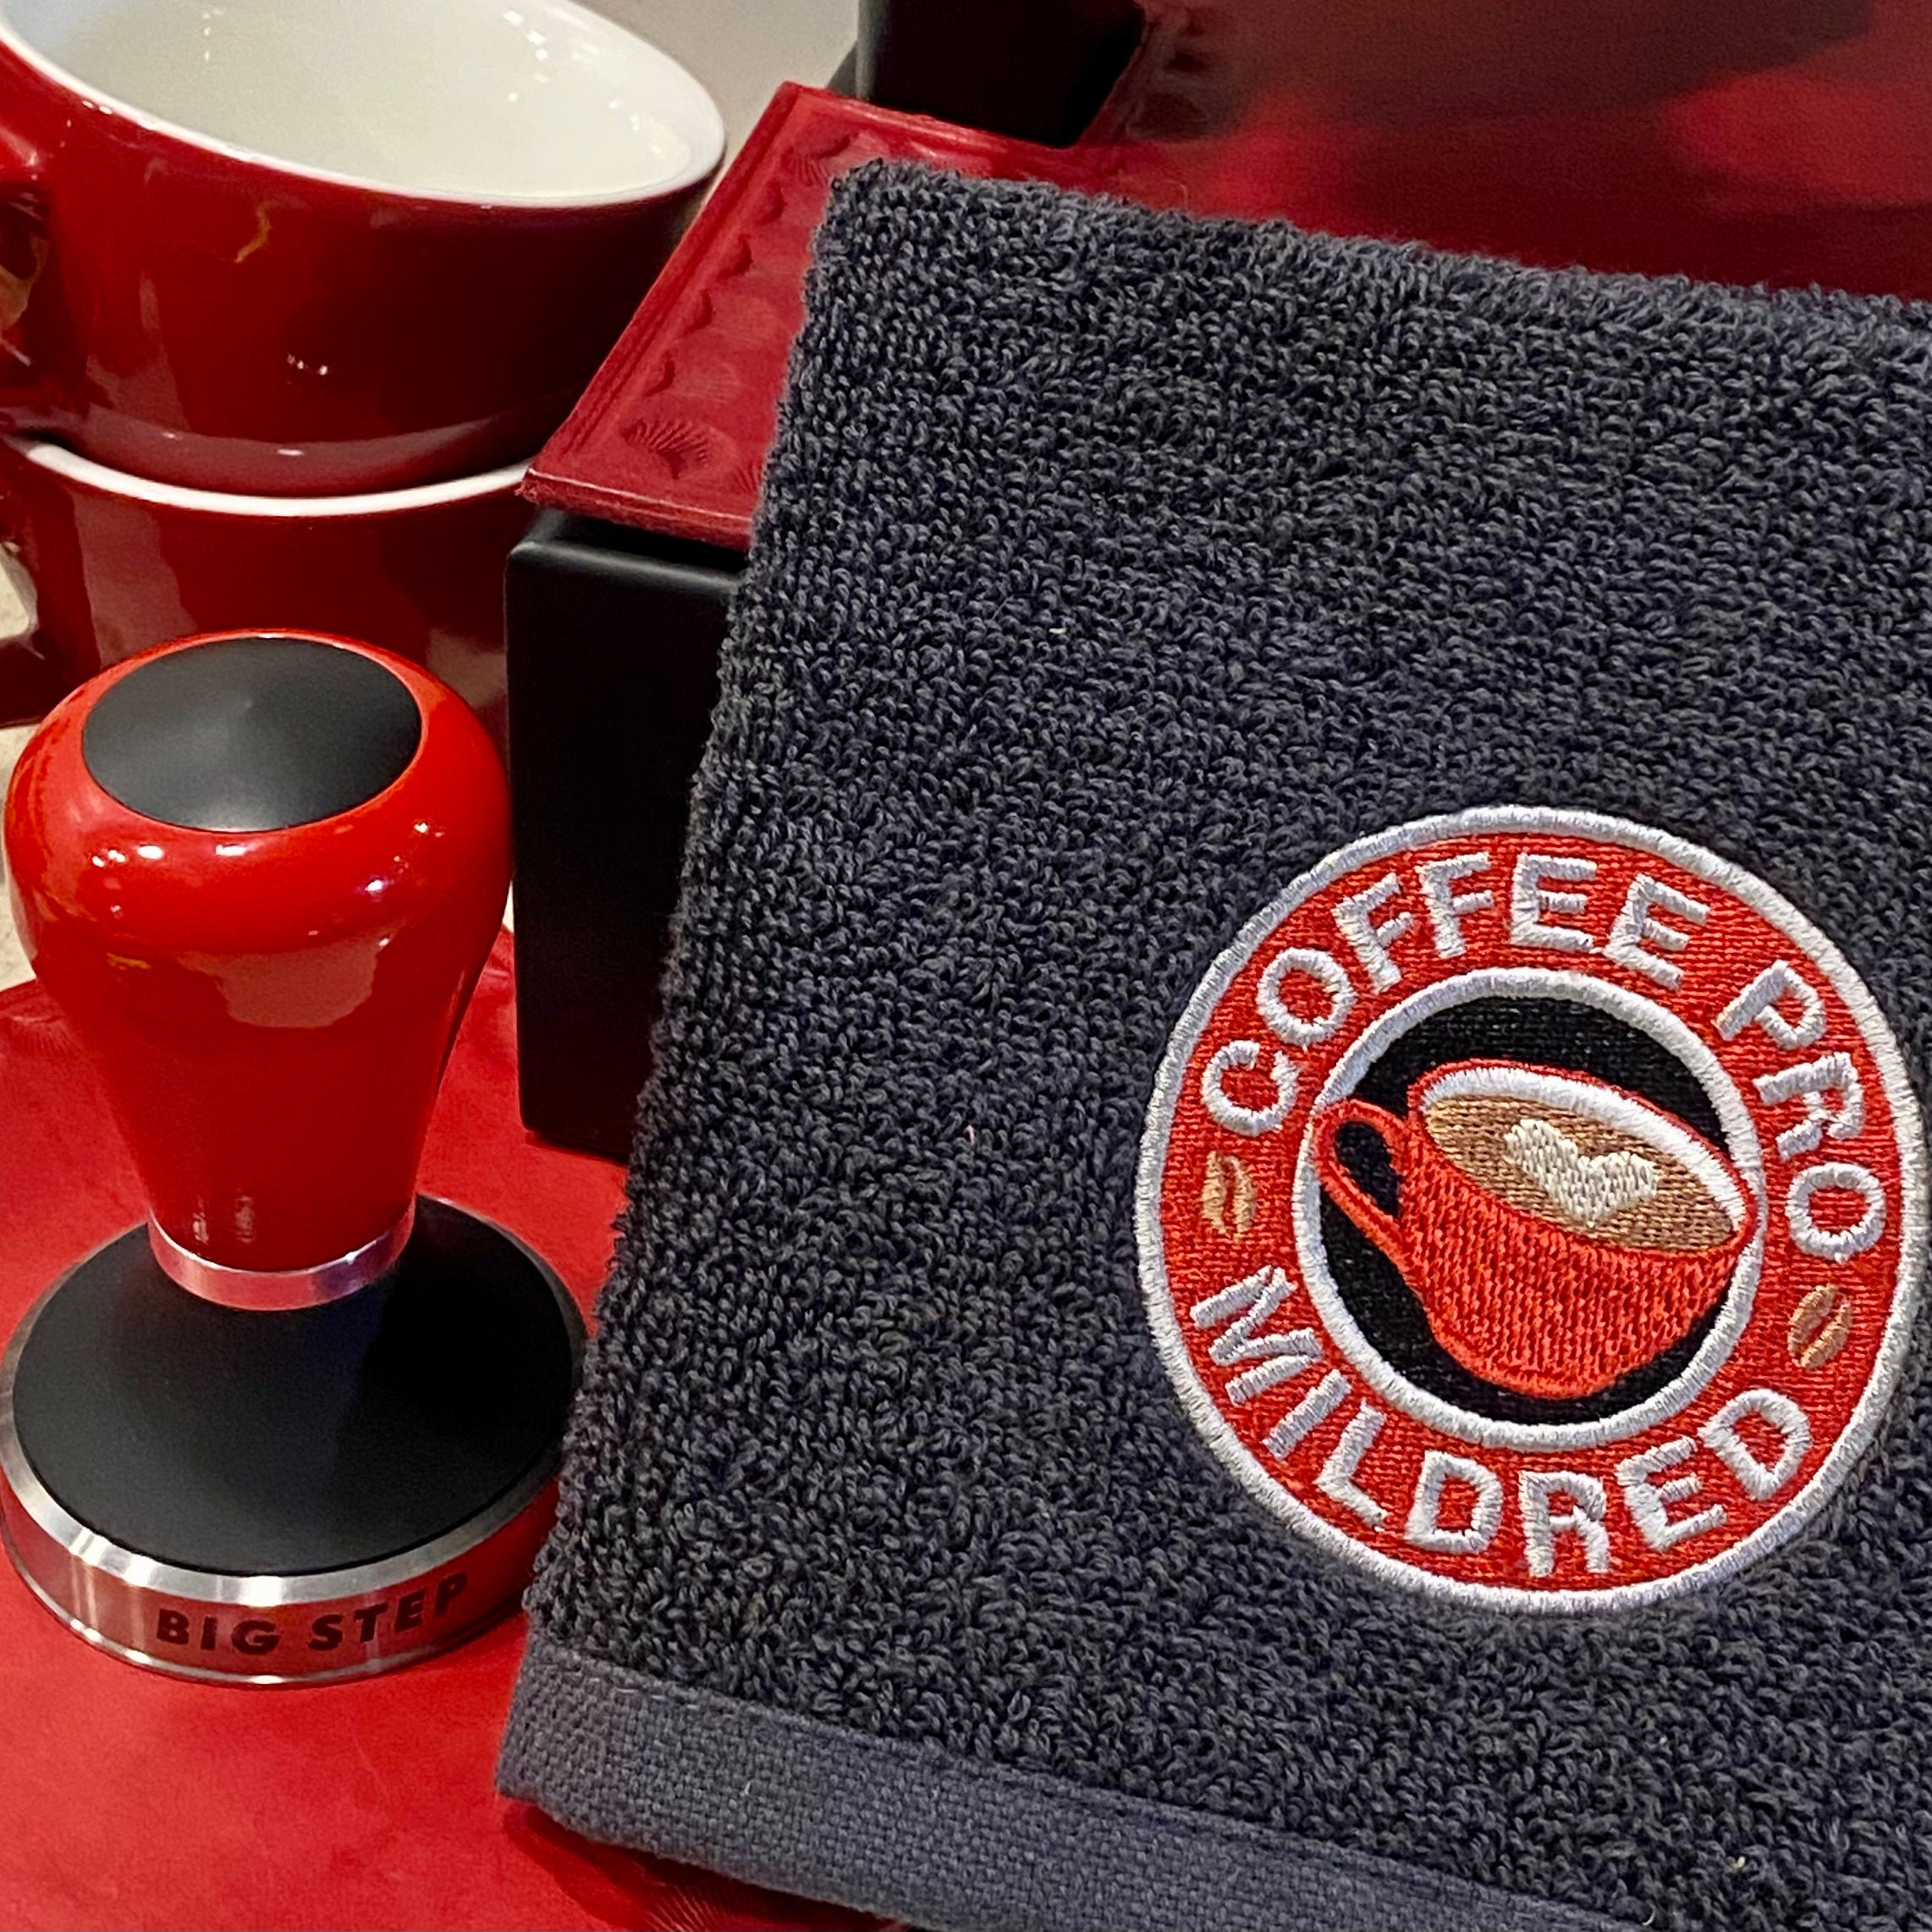 Mildred's Coffee Bar Towels